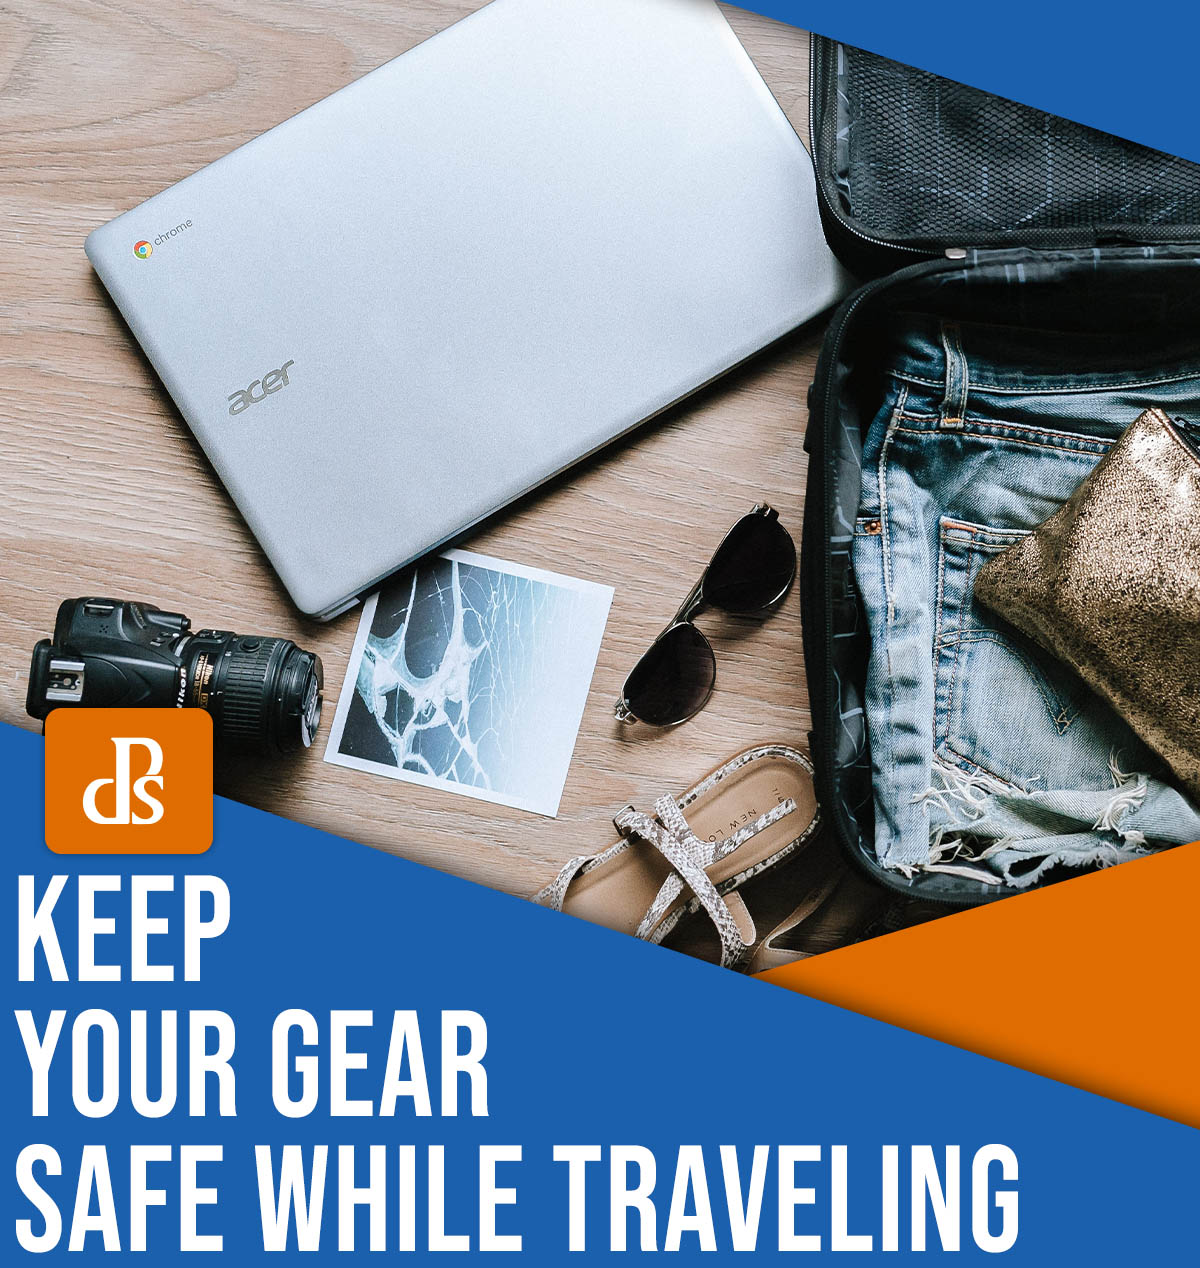 Keep your gear safe while traveling